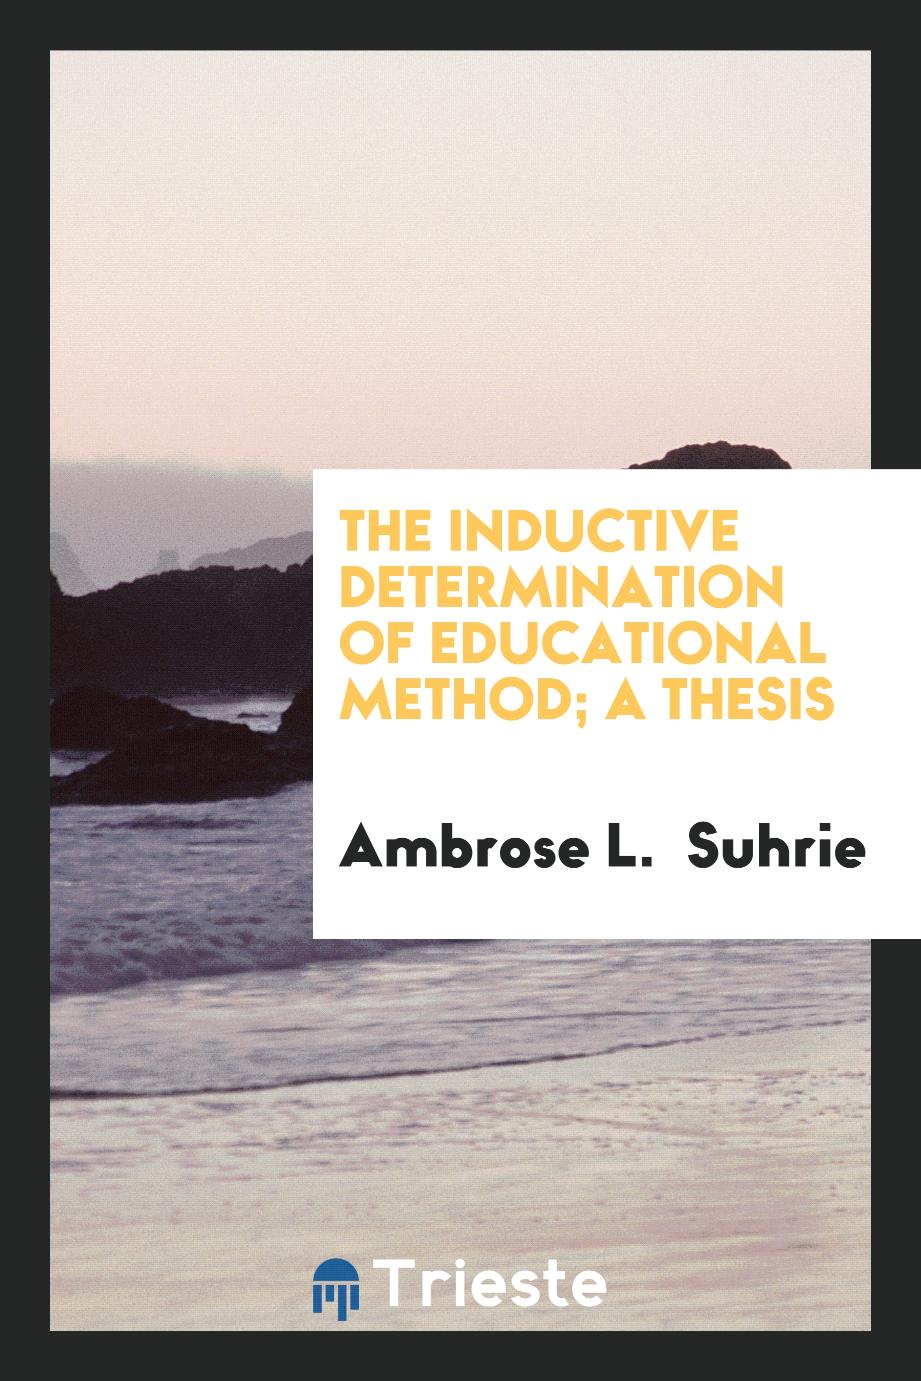 The Inductive Determination of Educational Method; A thesis